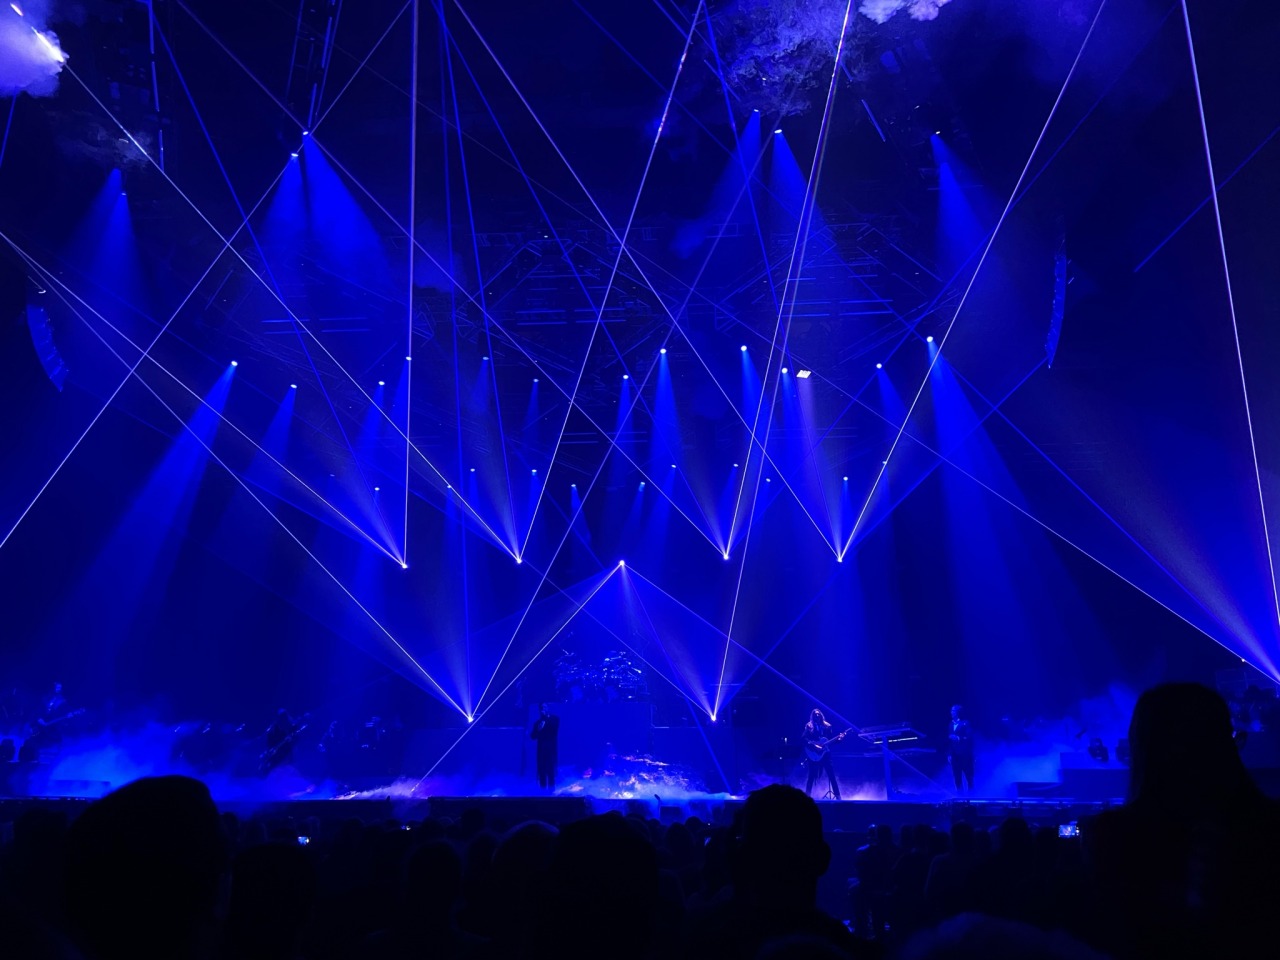 Went and saw Trans Siberian Orchestra last night, it was an awesome show and we had a blast! 